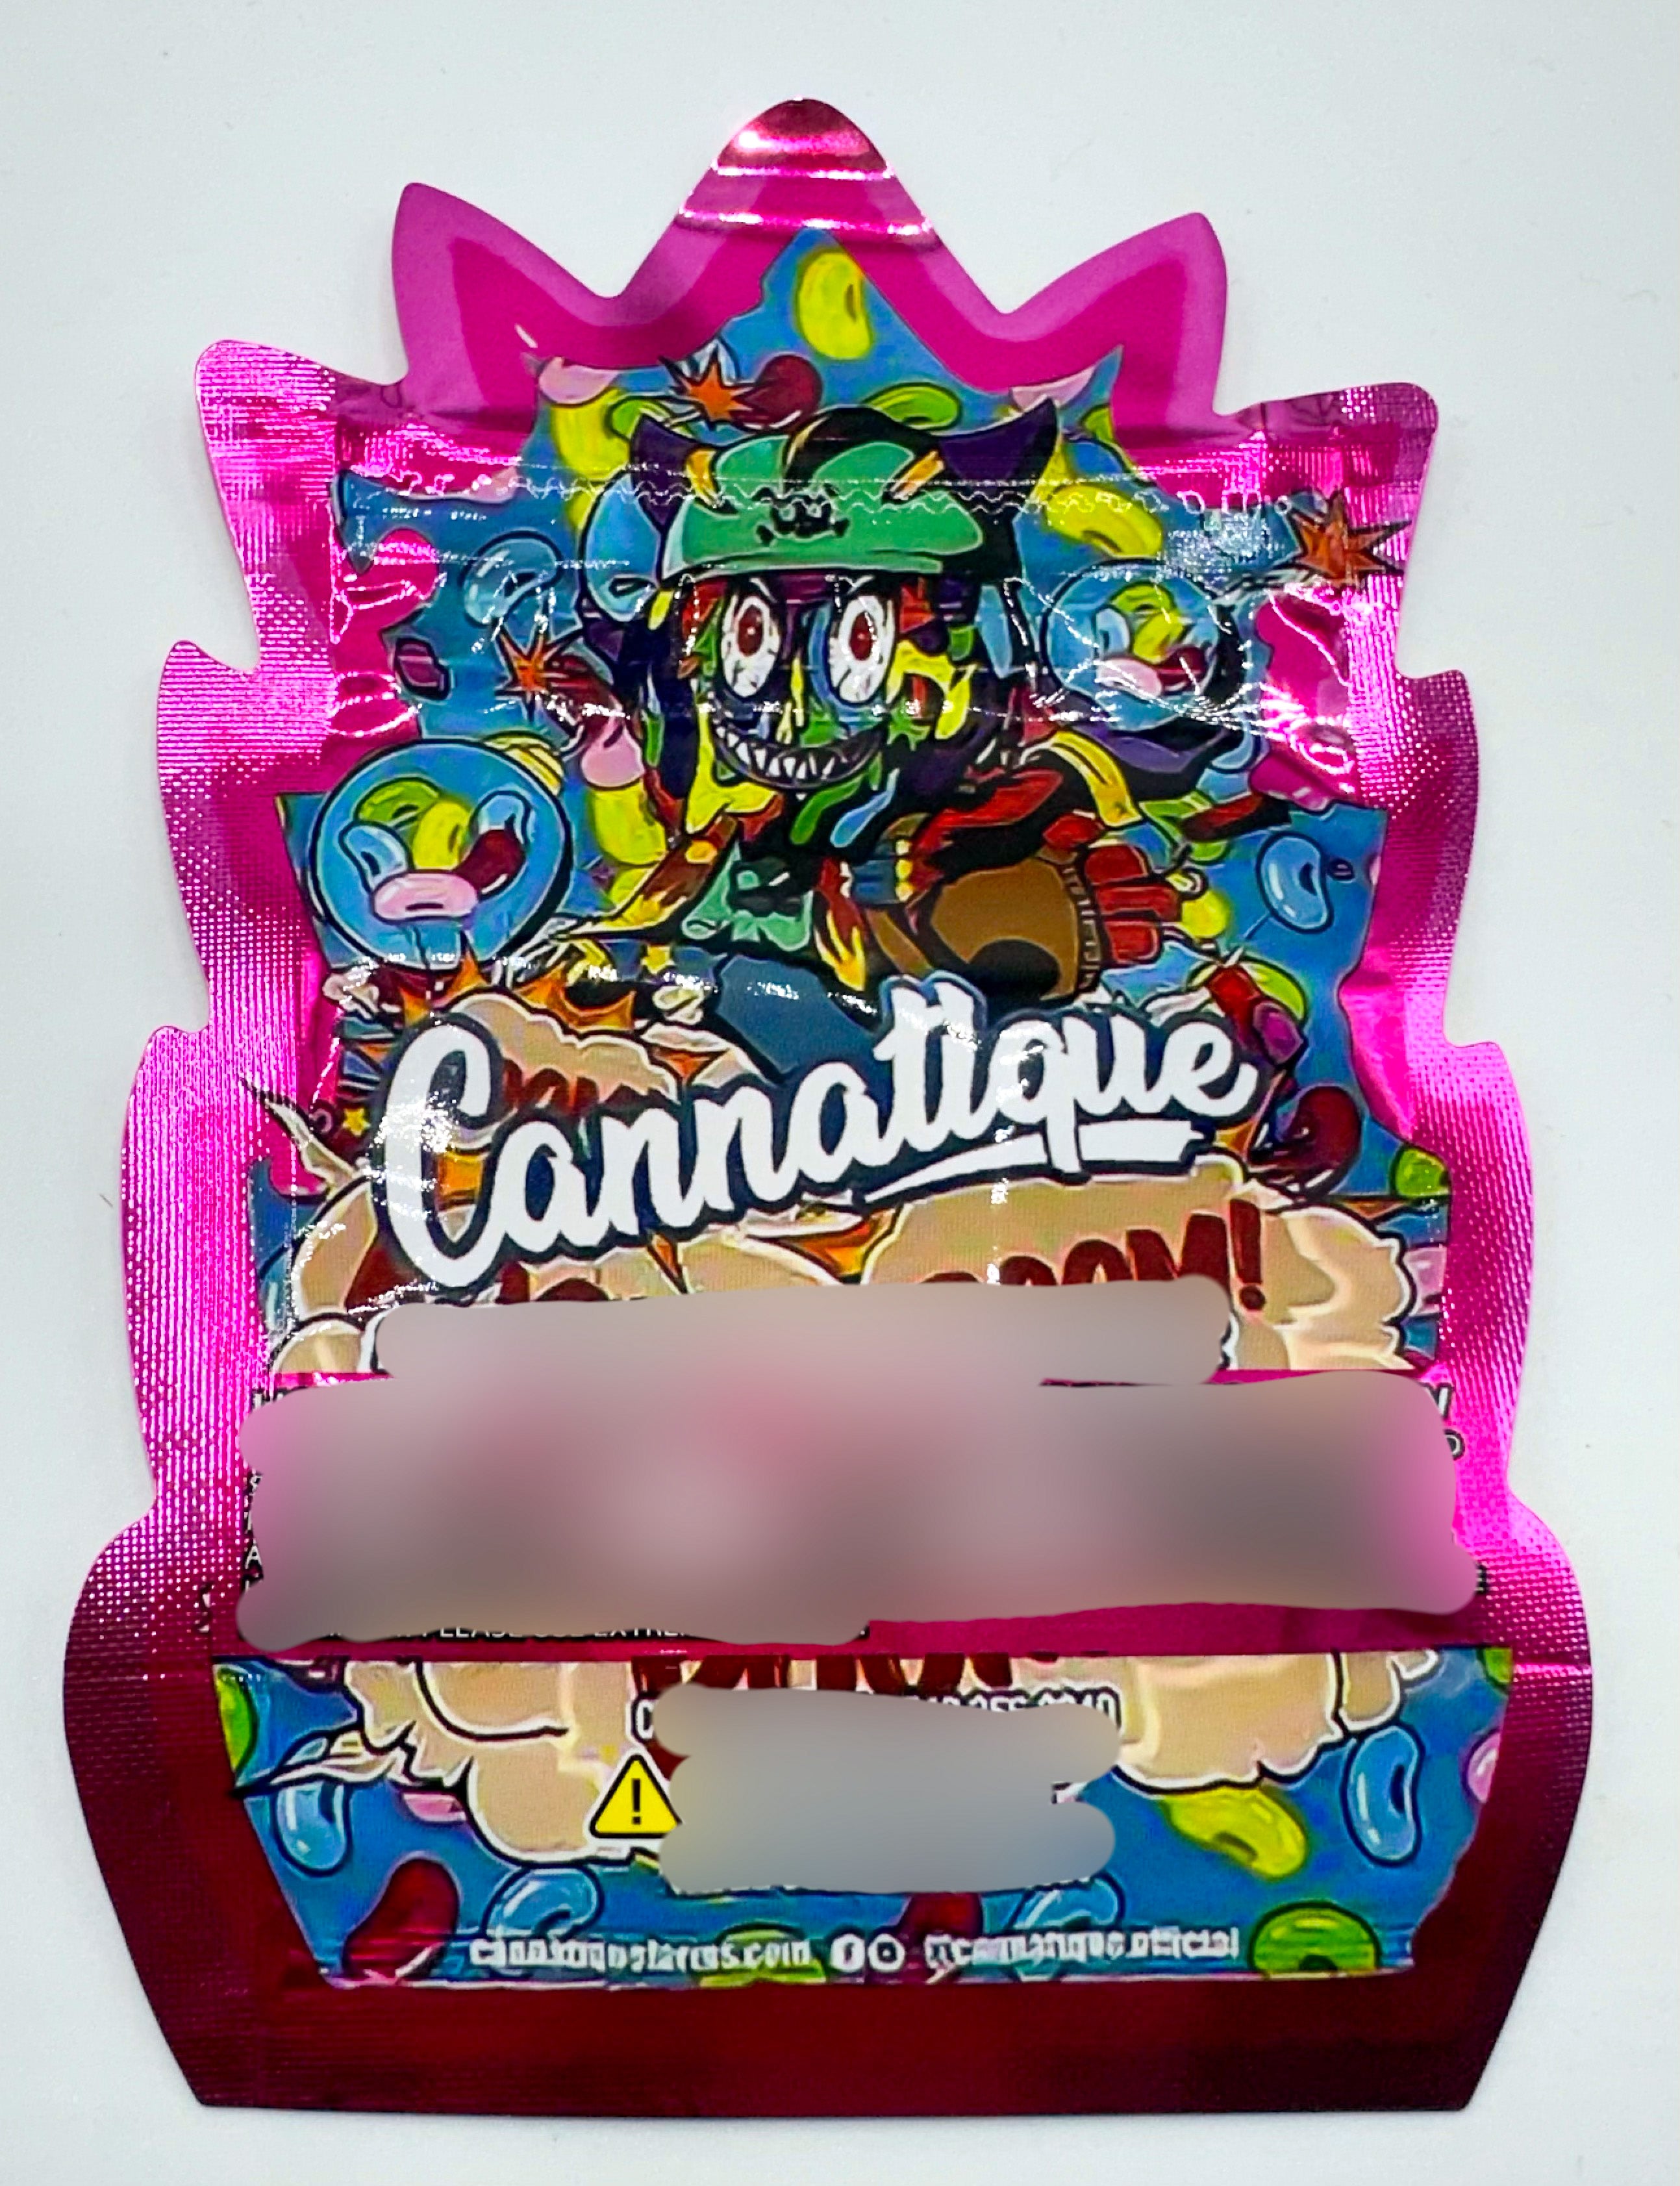 3D Popping Candy  3.5g Mylar bags